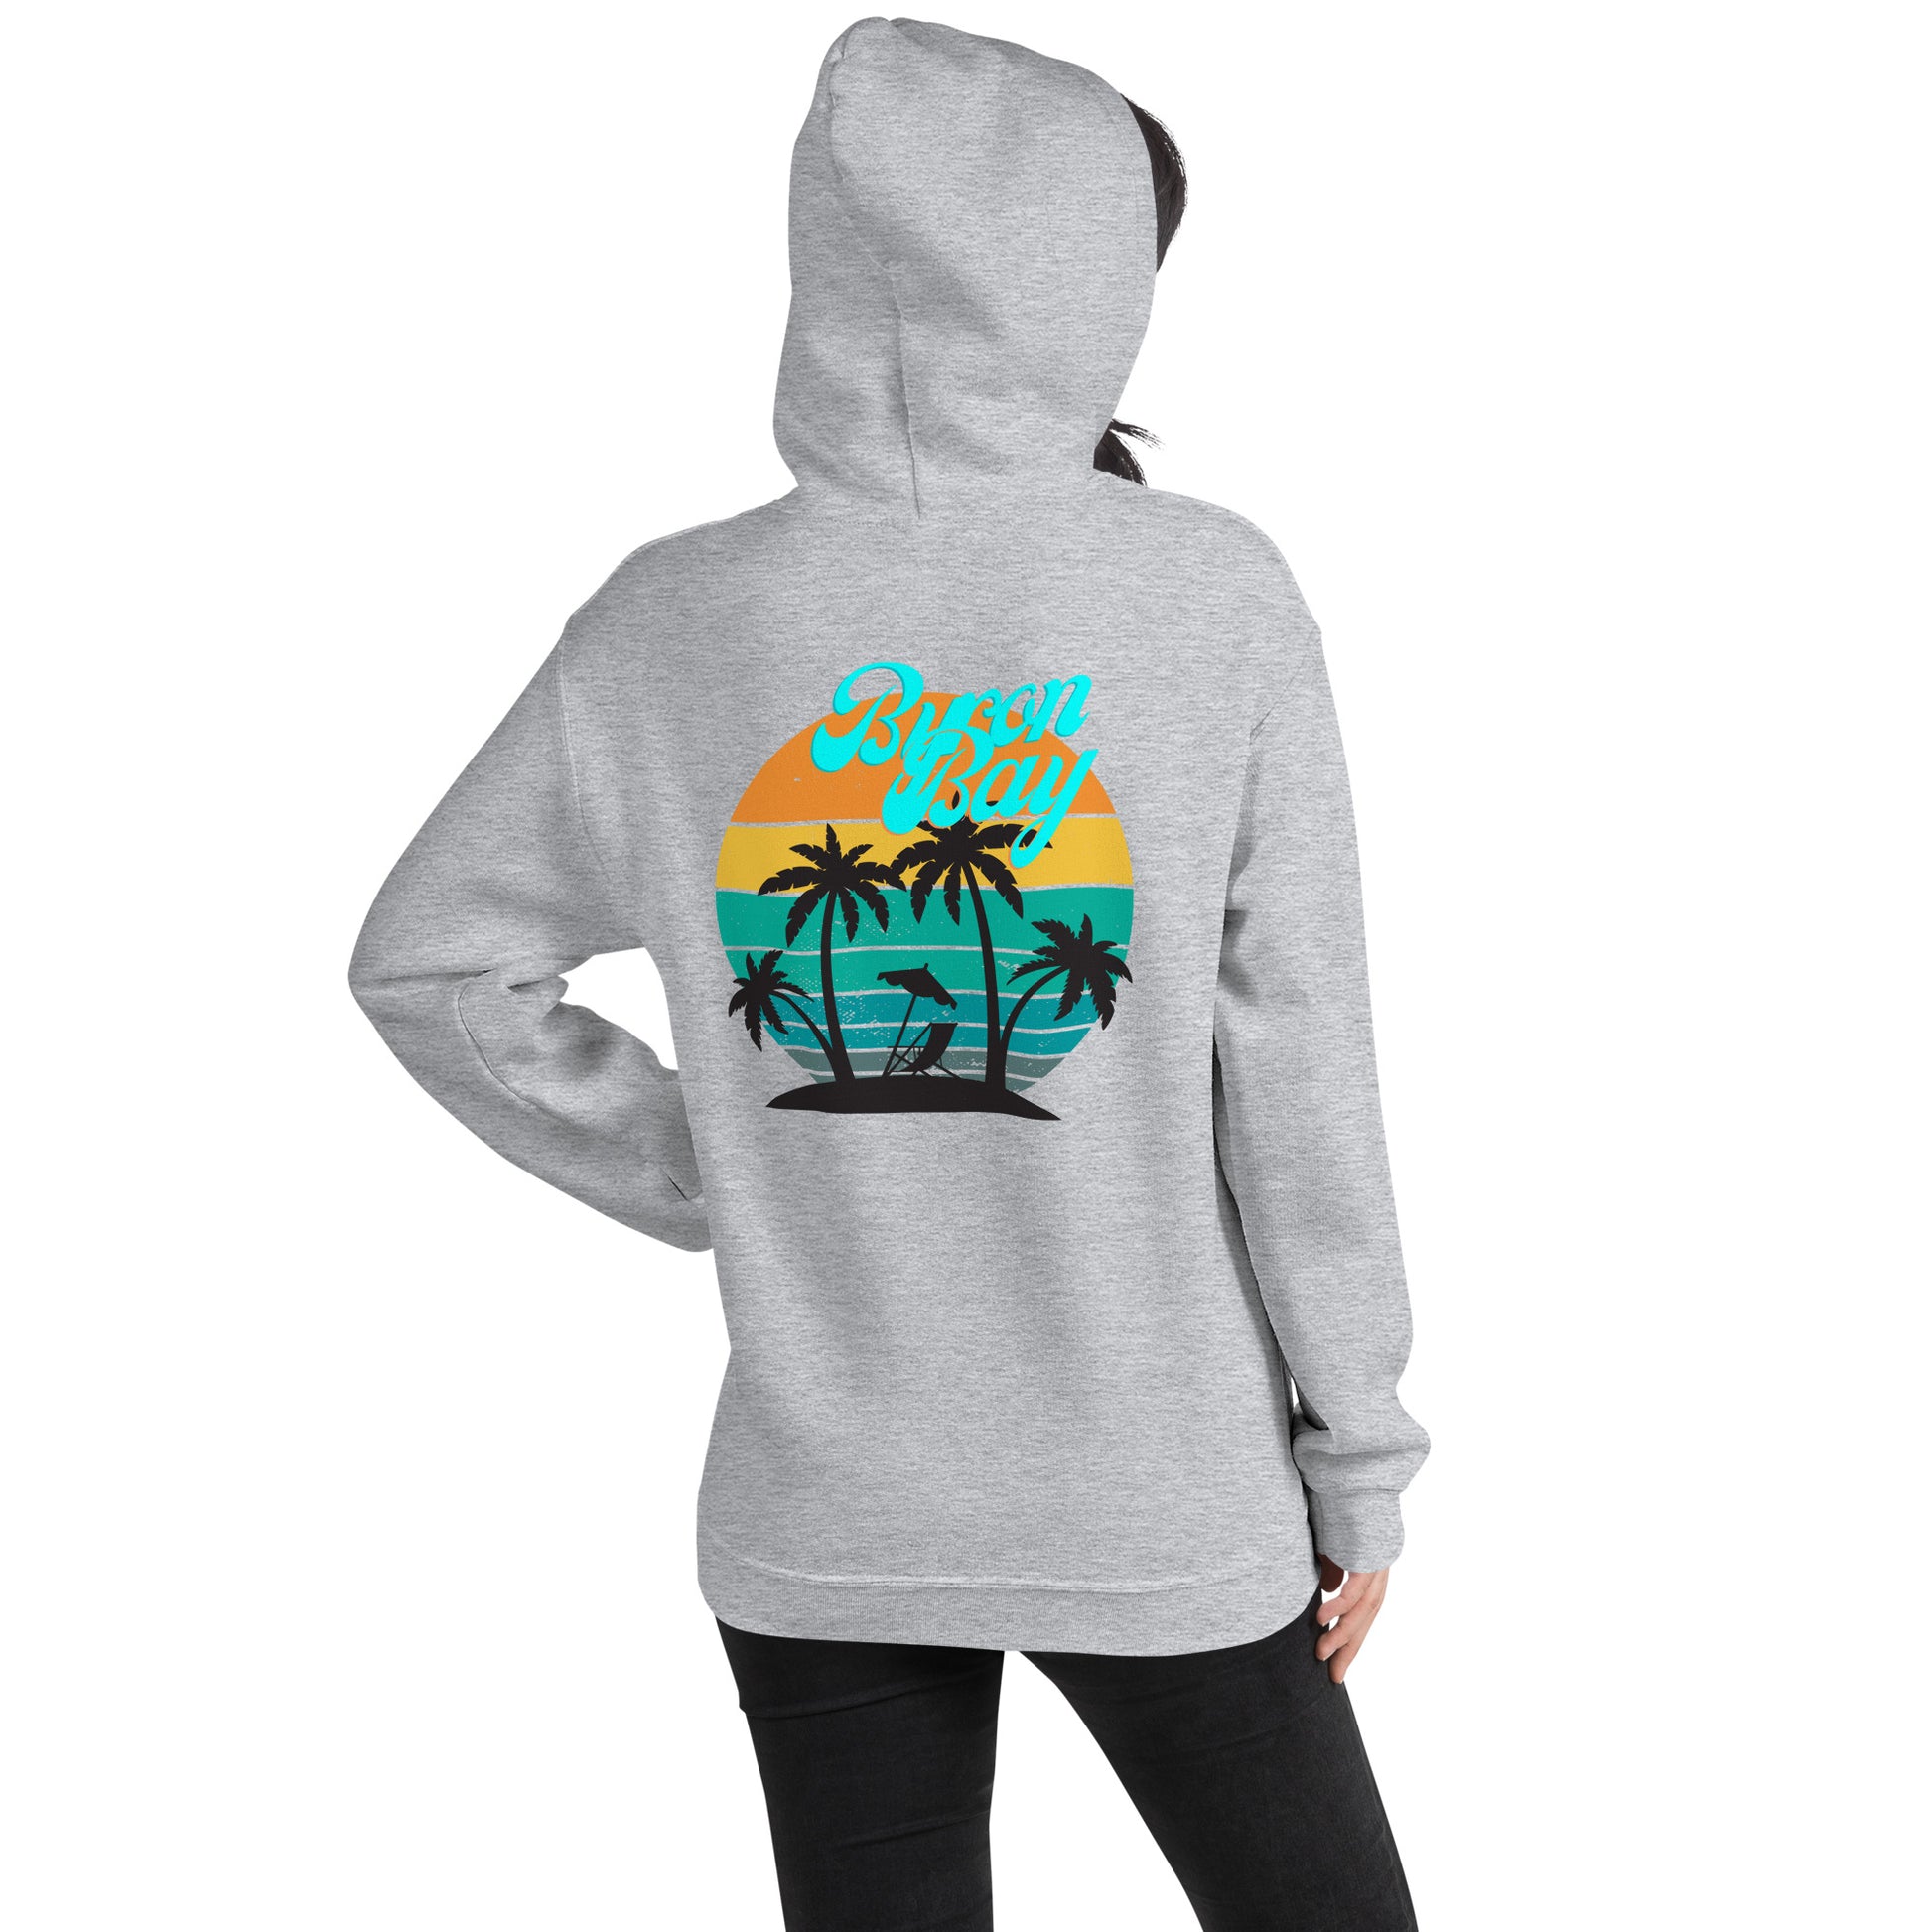  Unisex Hoodie - Sport Grey - back view being warn by woman with the hood on and one hand in the pocket - Byron Bay design on back, plain front with pouch pocket - Genuine Byron Bay Merchandise | Produced by Go Sea Kayak Byron Bay 